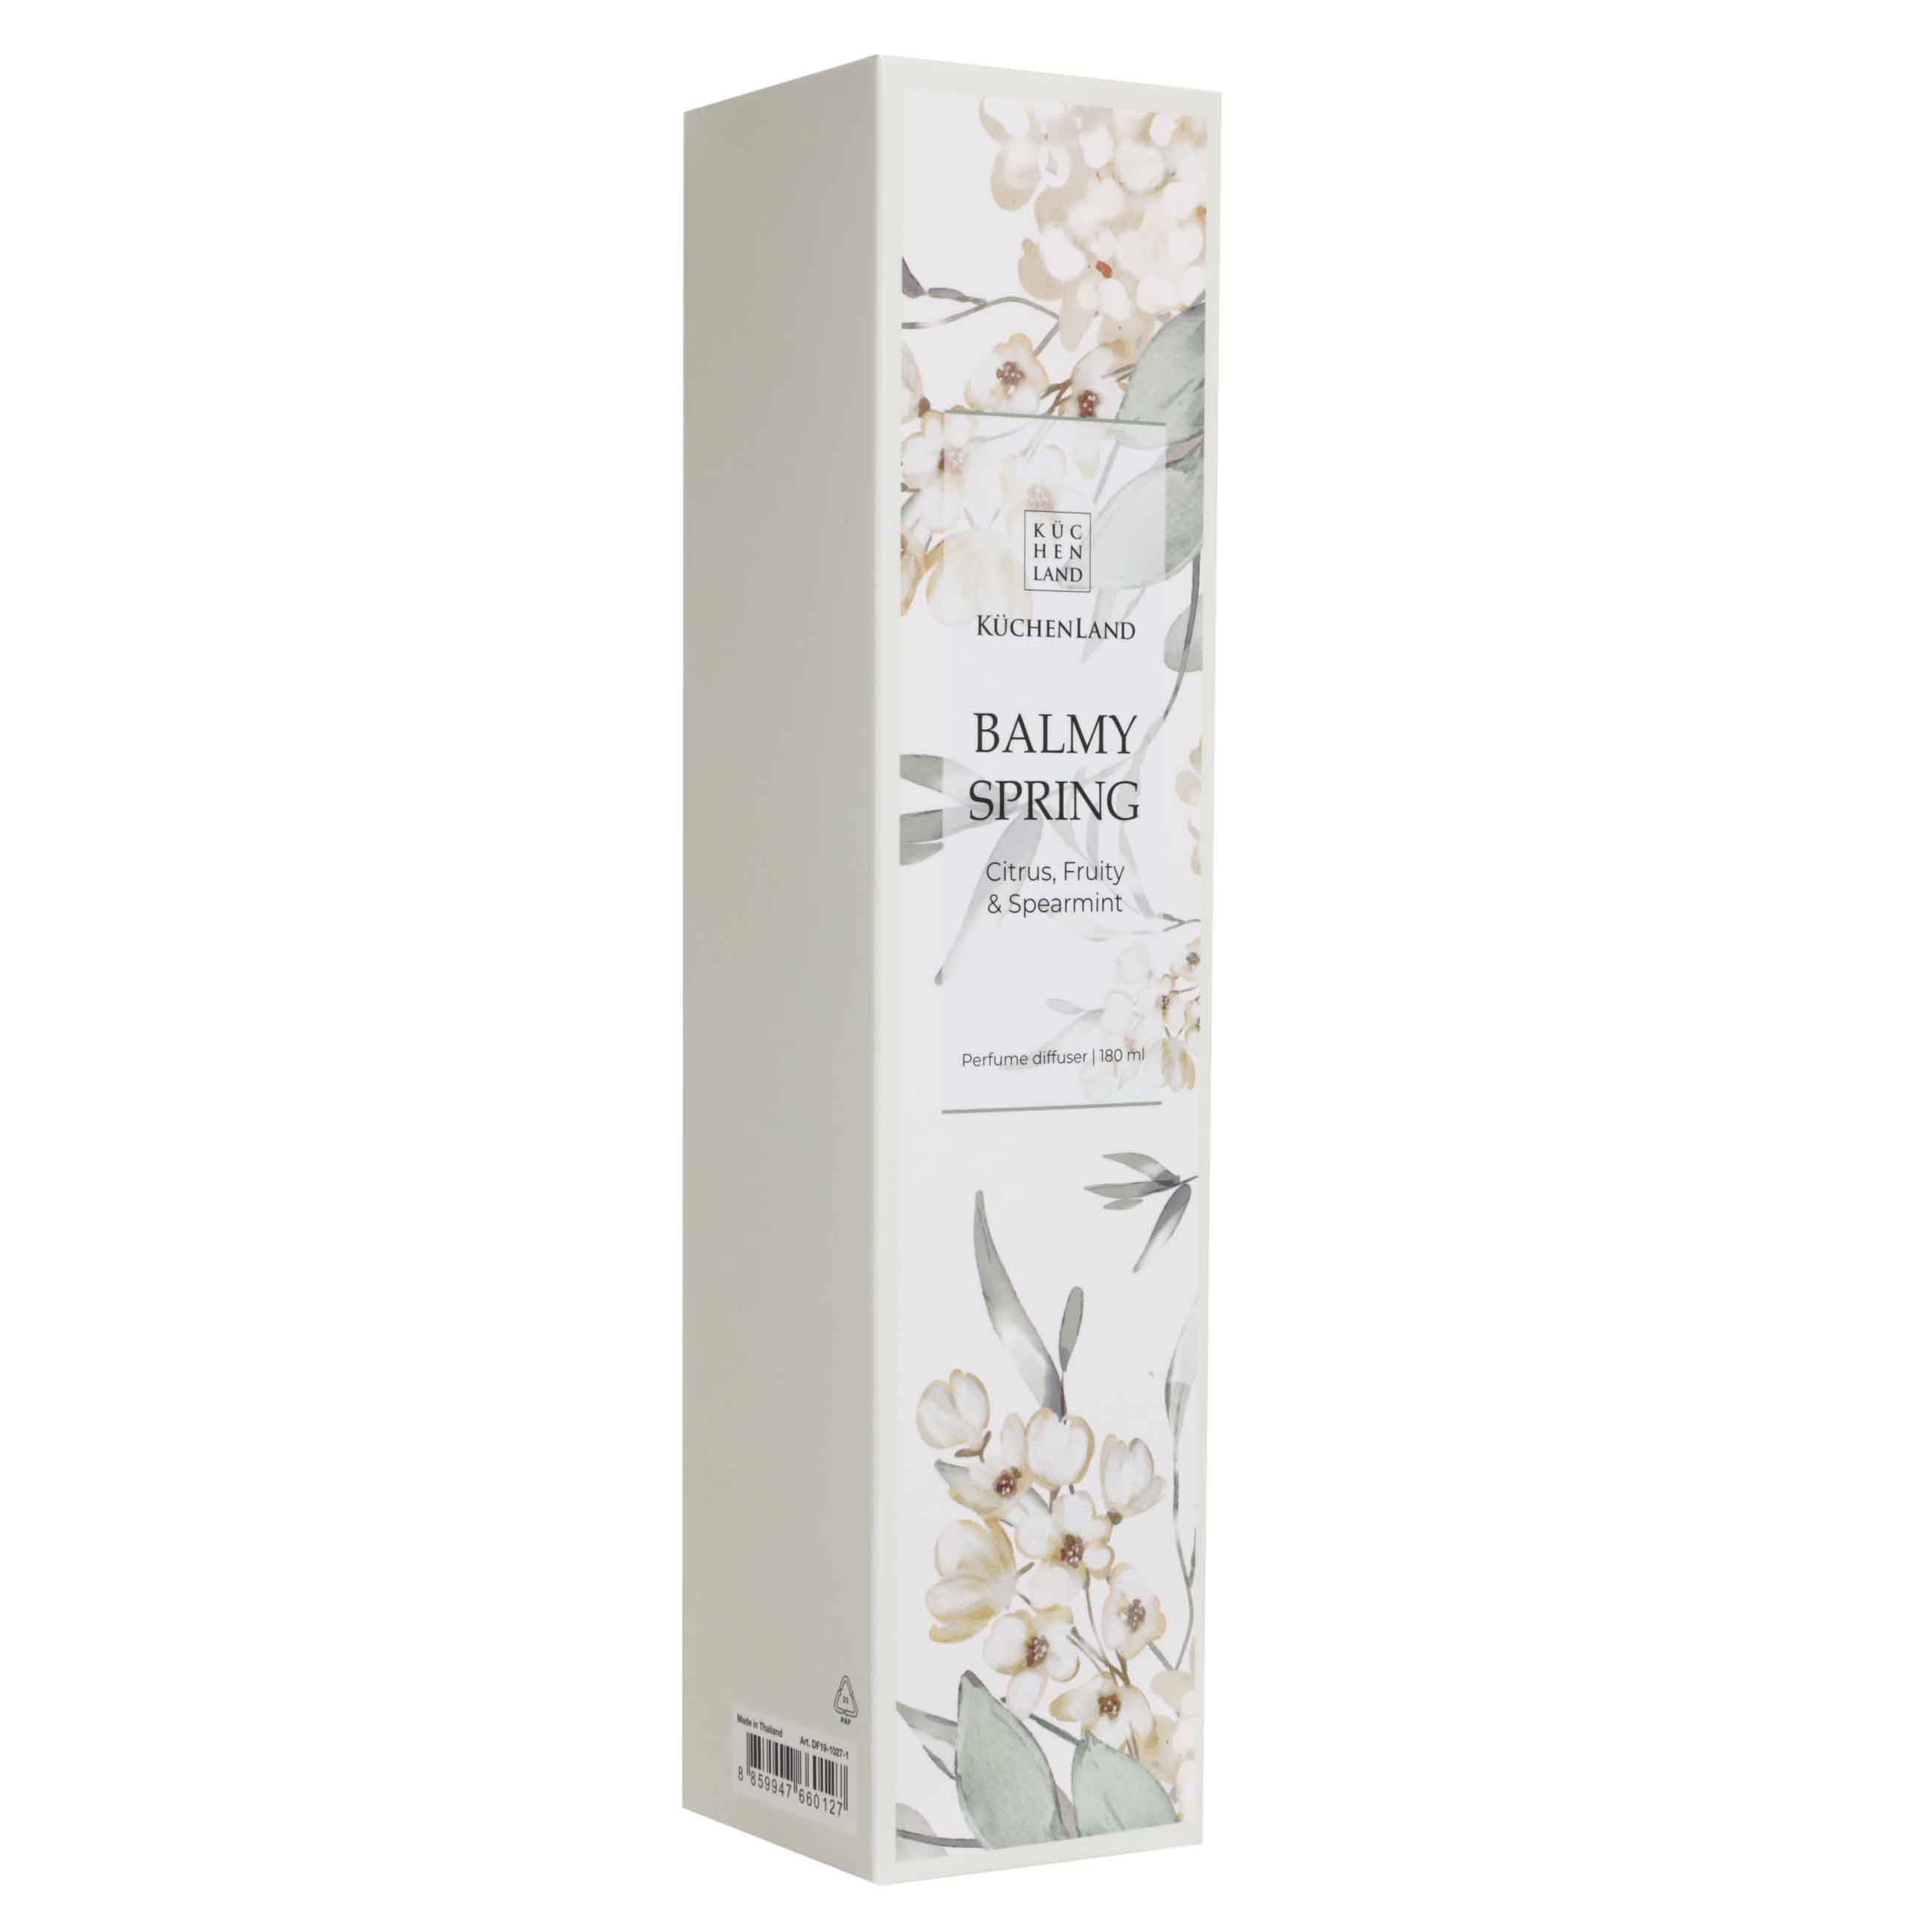 Perfume diffuser, 180 ml, with dried flowers, Citrus, Fruity&Spearmint, Balmy spring изображение № 2